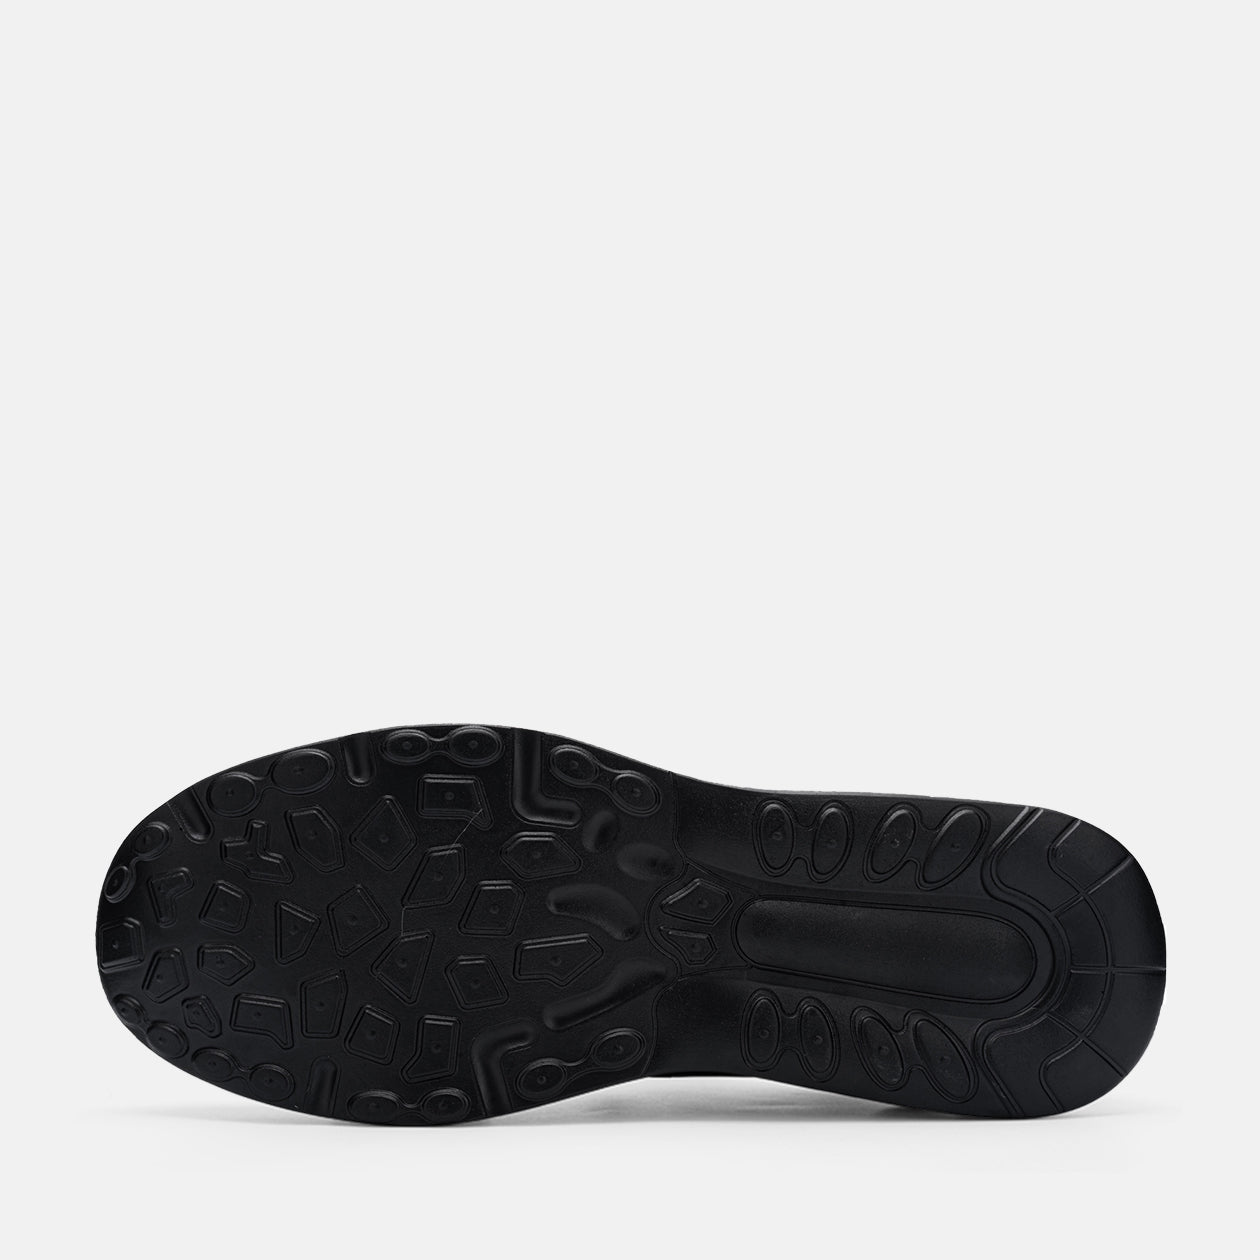 the sole of slip resistant work shoe